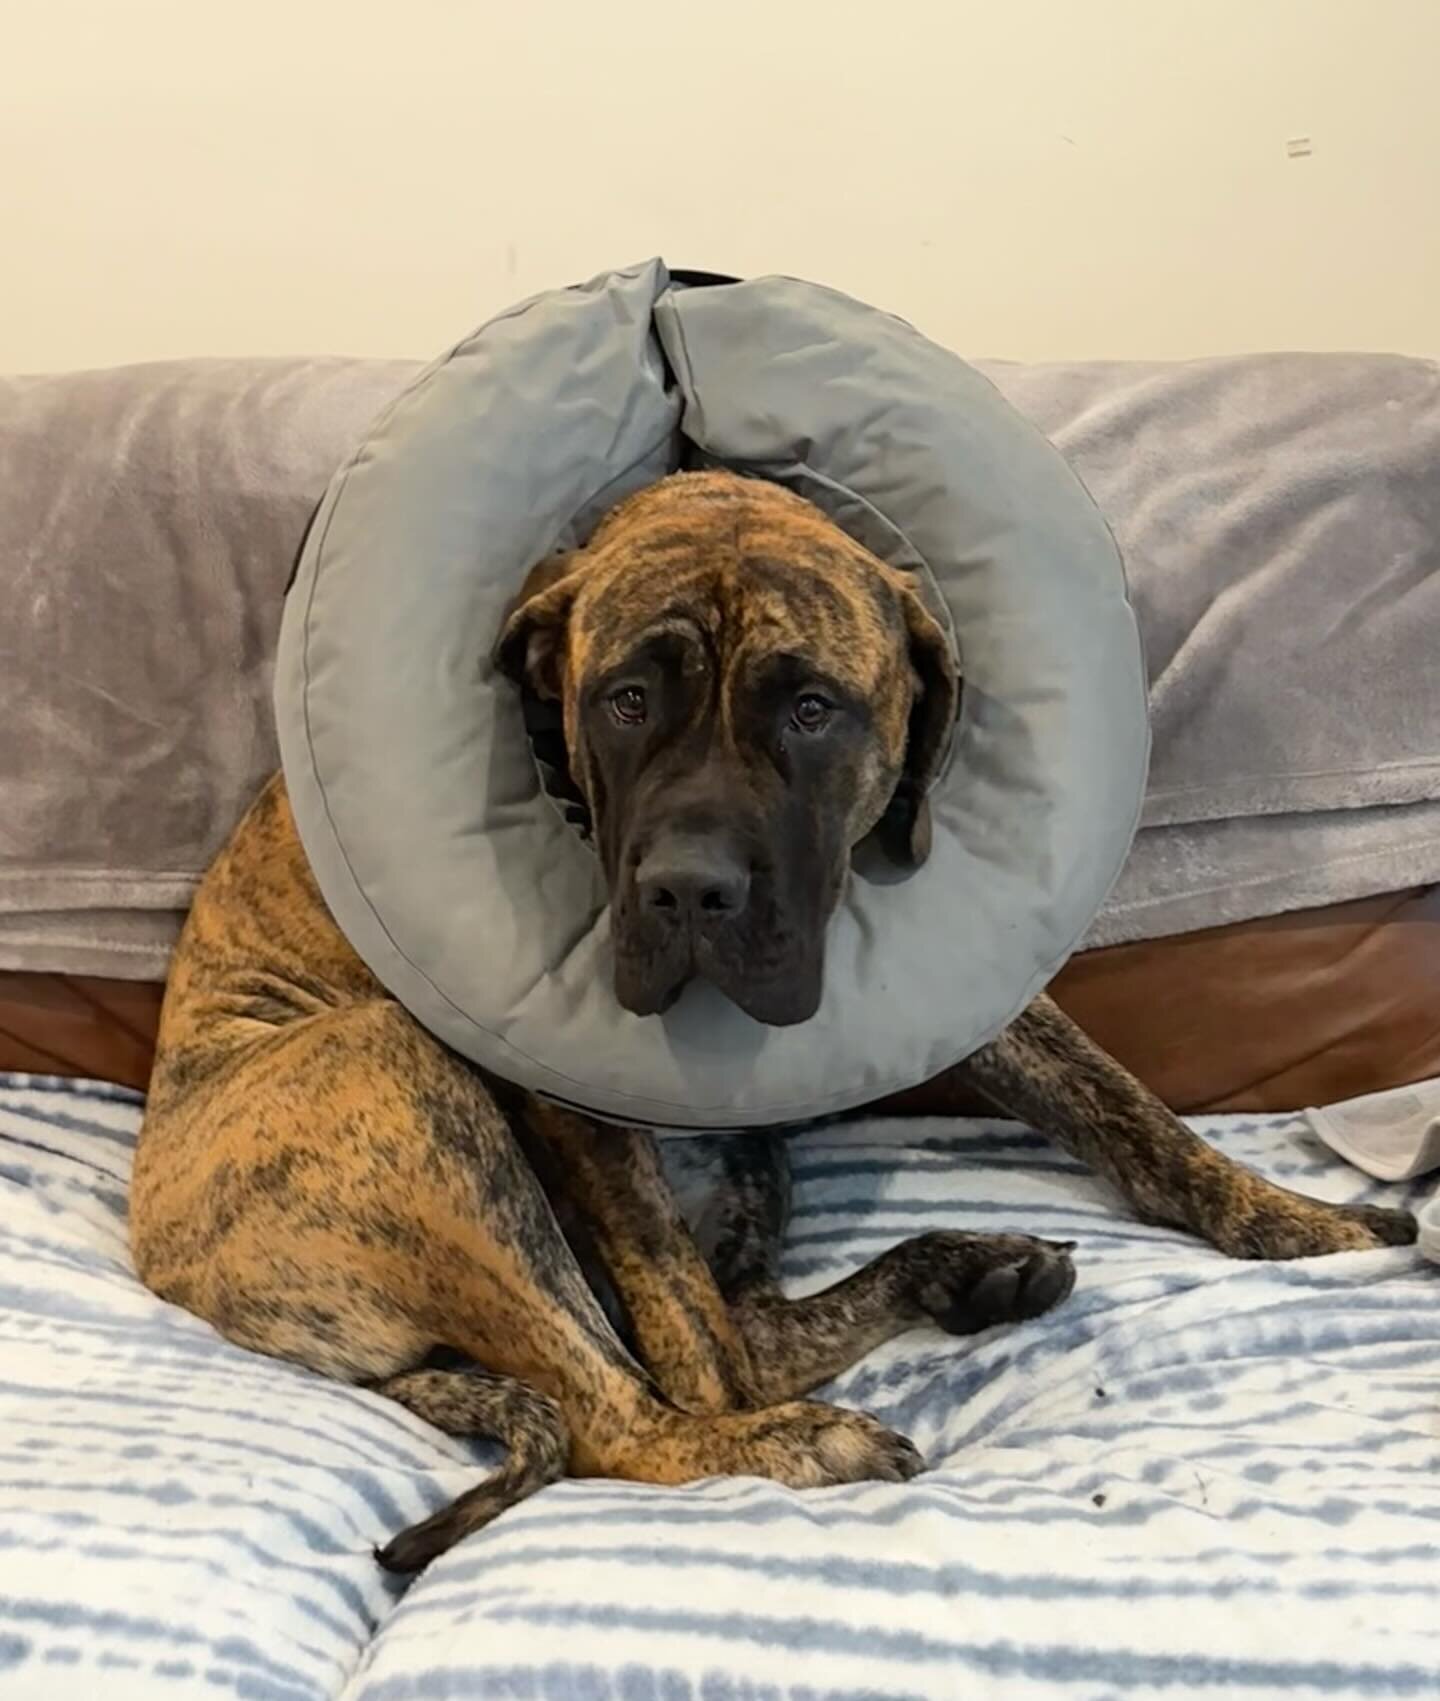 Primary care veterinarians commonly spay, neuter, and perform many other surgeries themselves. But on certain days or for certain patients, it&rsquo;s more efficient to rely on the expertise and equipment of Anchor&rsquo;s specialist surgeons. 

Mill